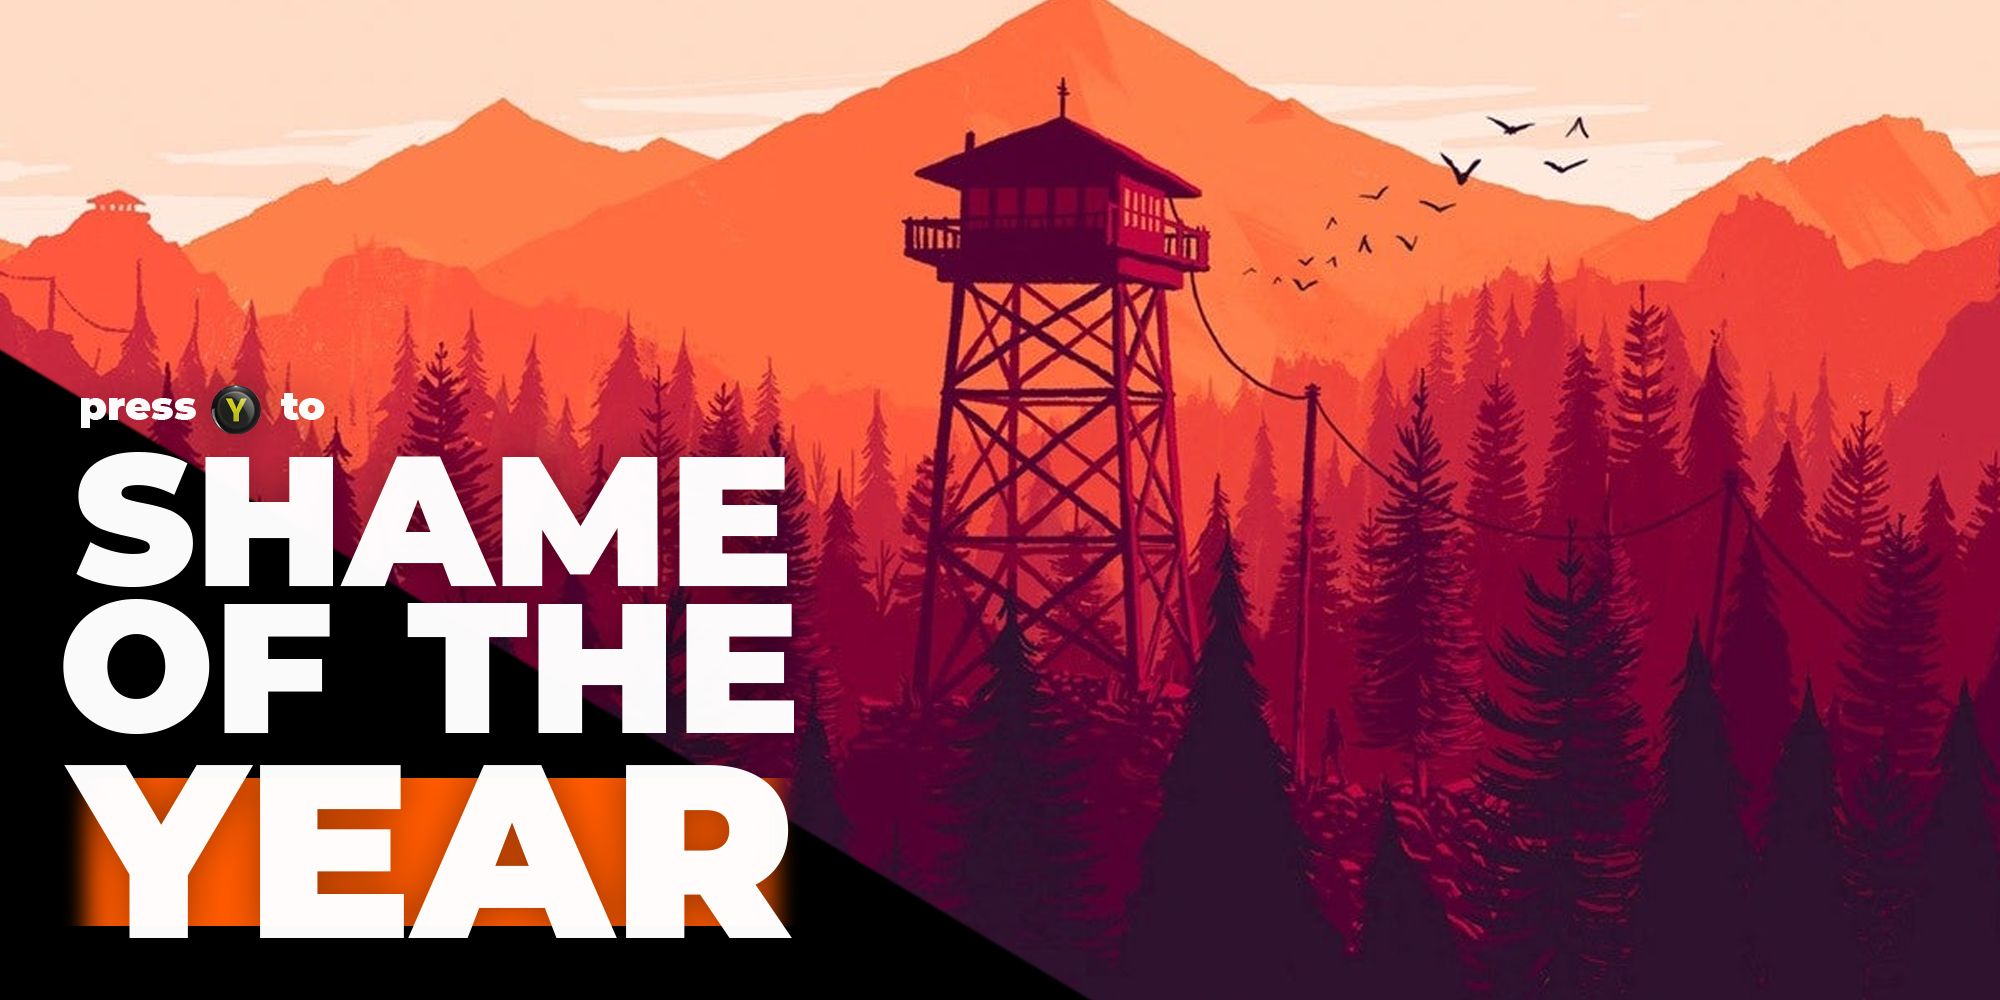 Shame of the Year feature image for David, showing a view of Firewatch.